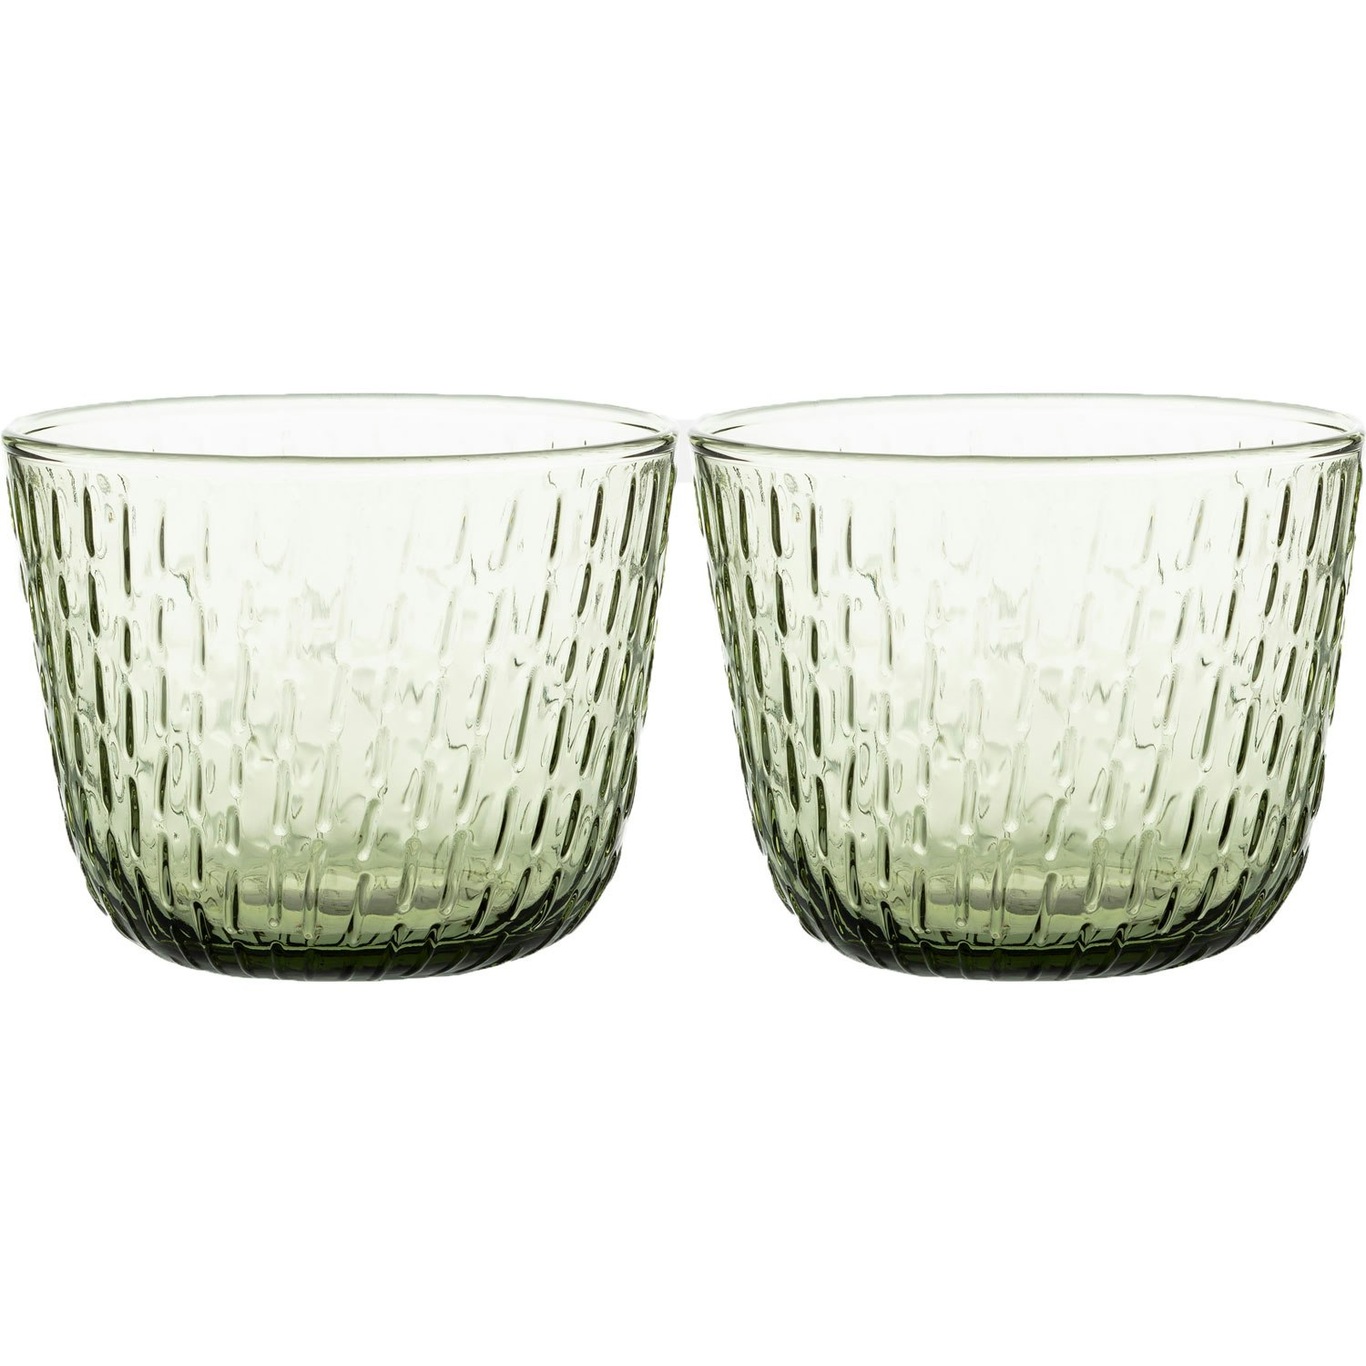 Syksy Tumblerglas 20 cl 2-pack, Oliv